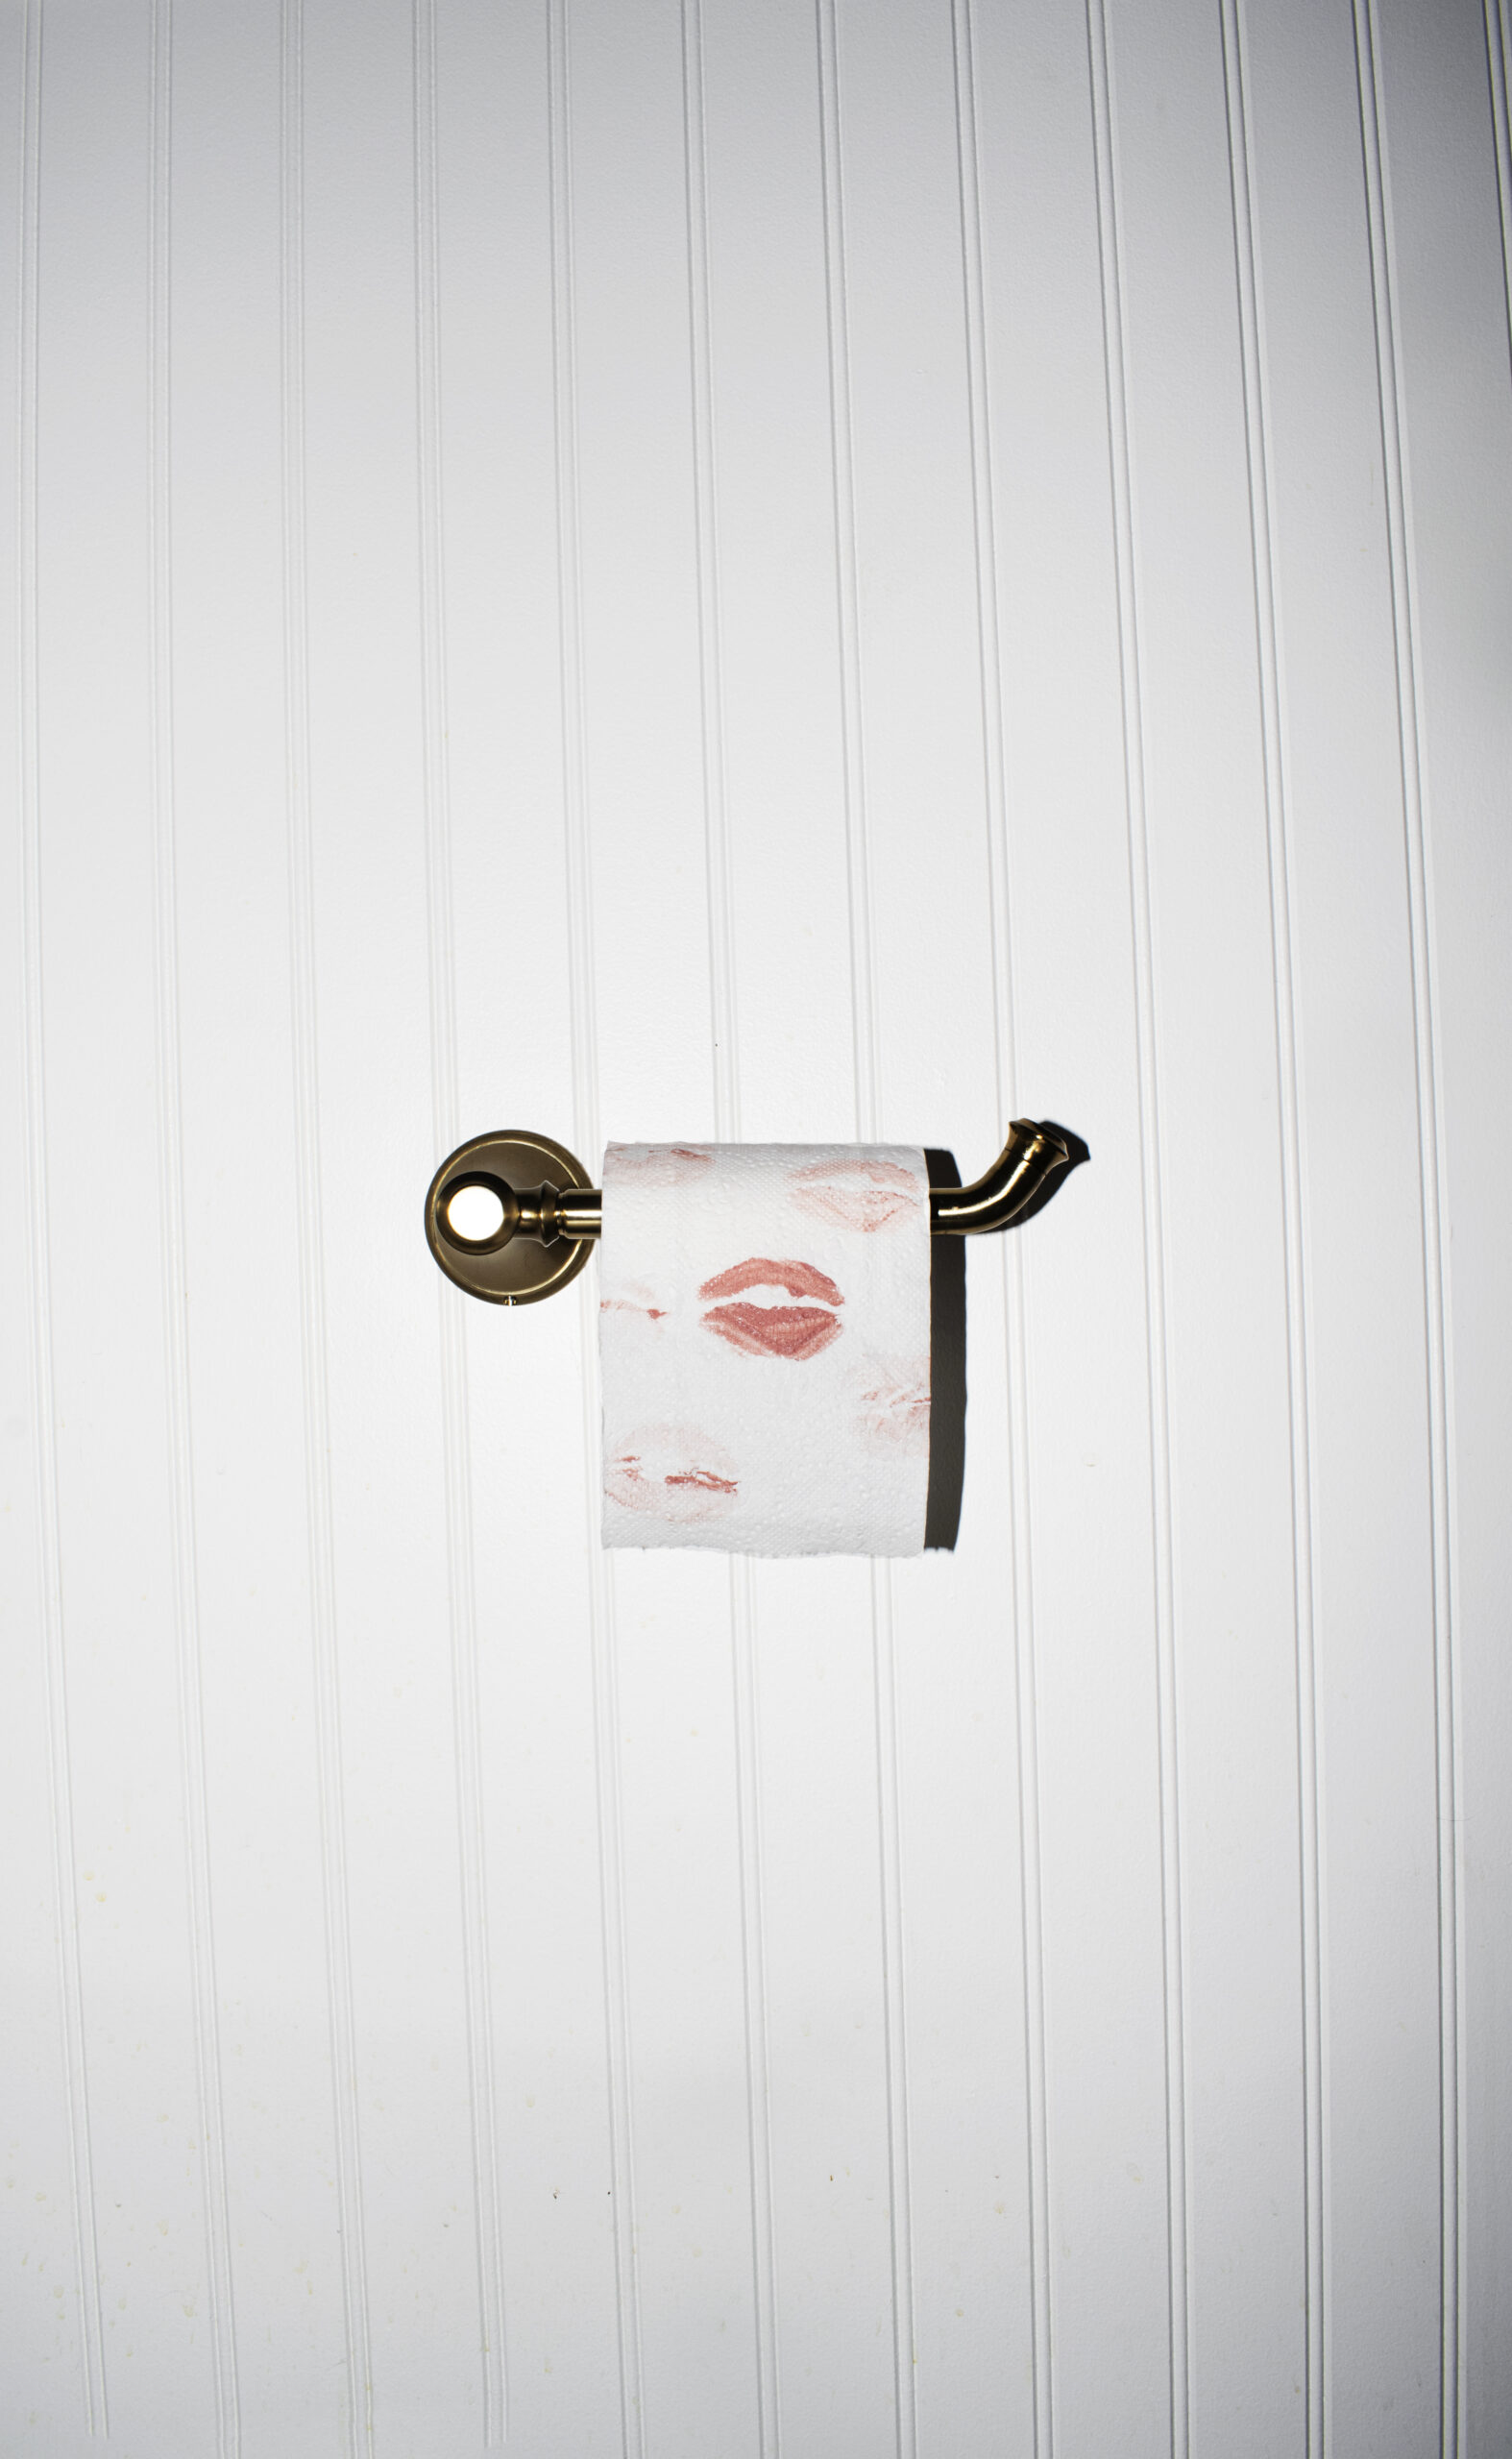 Photograph of a brass toilet paper holder with pink lipstick spots on the roll.